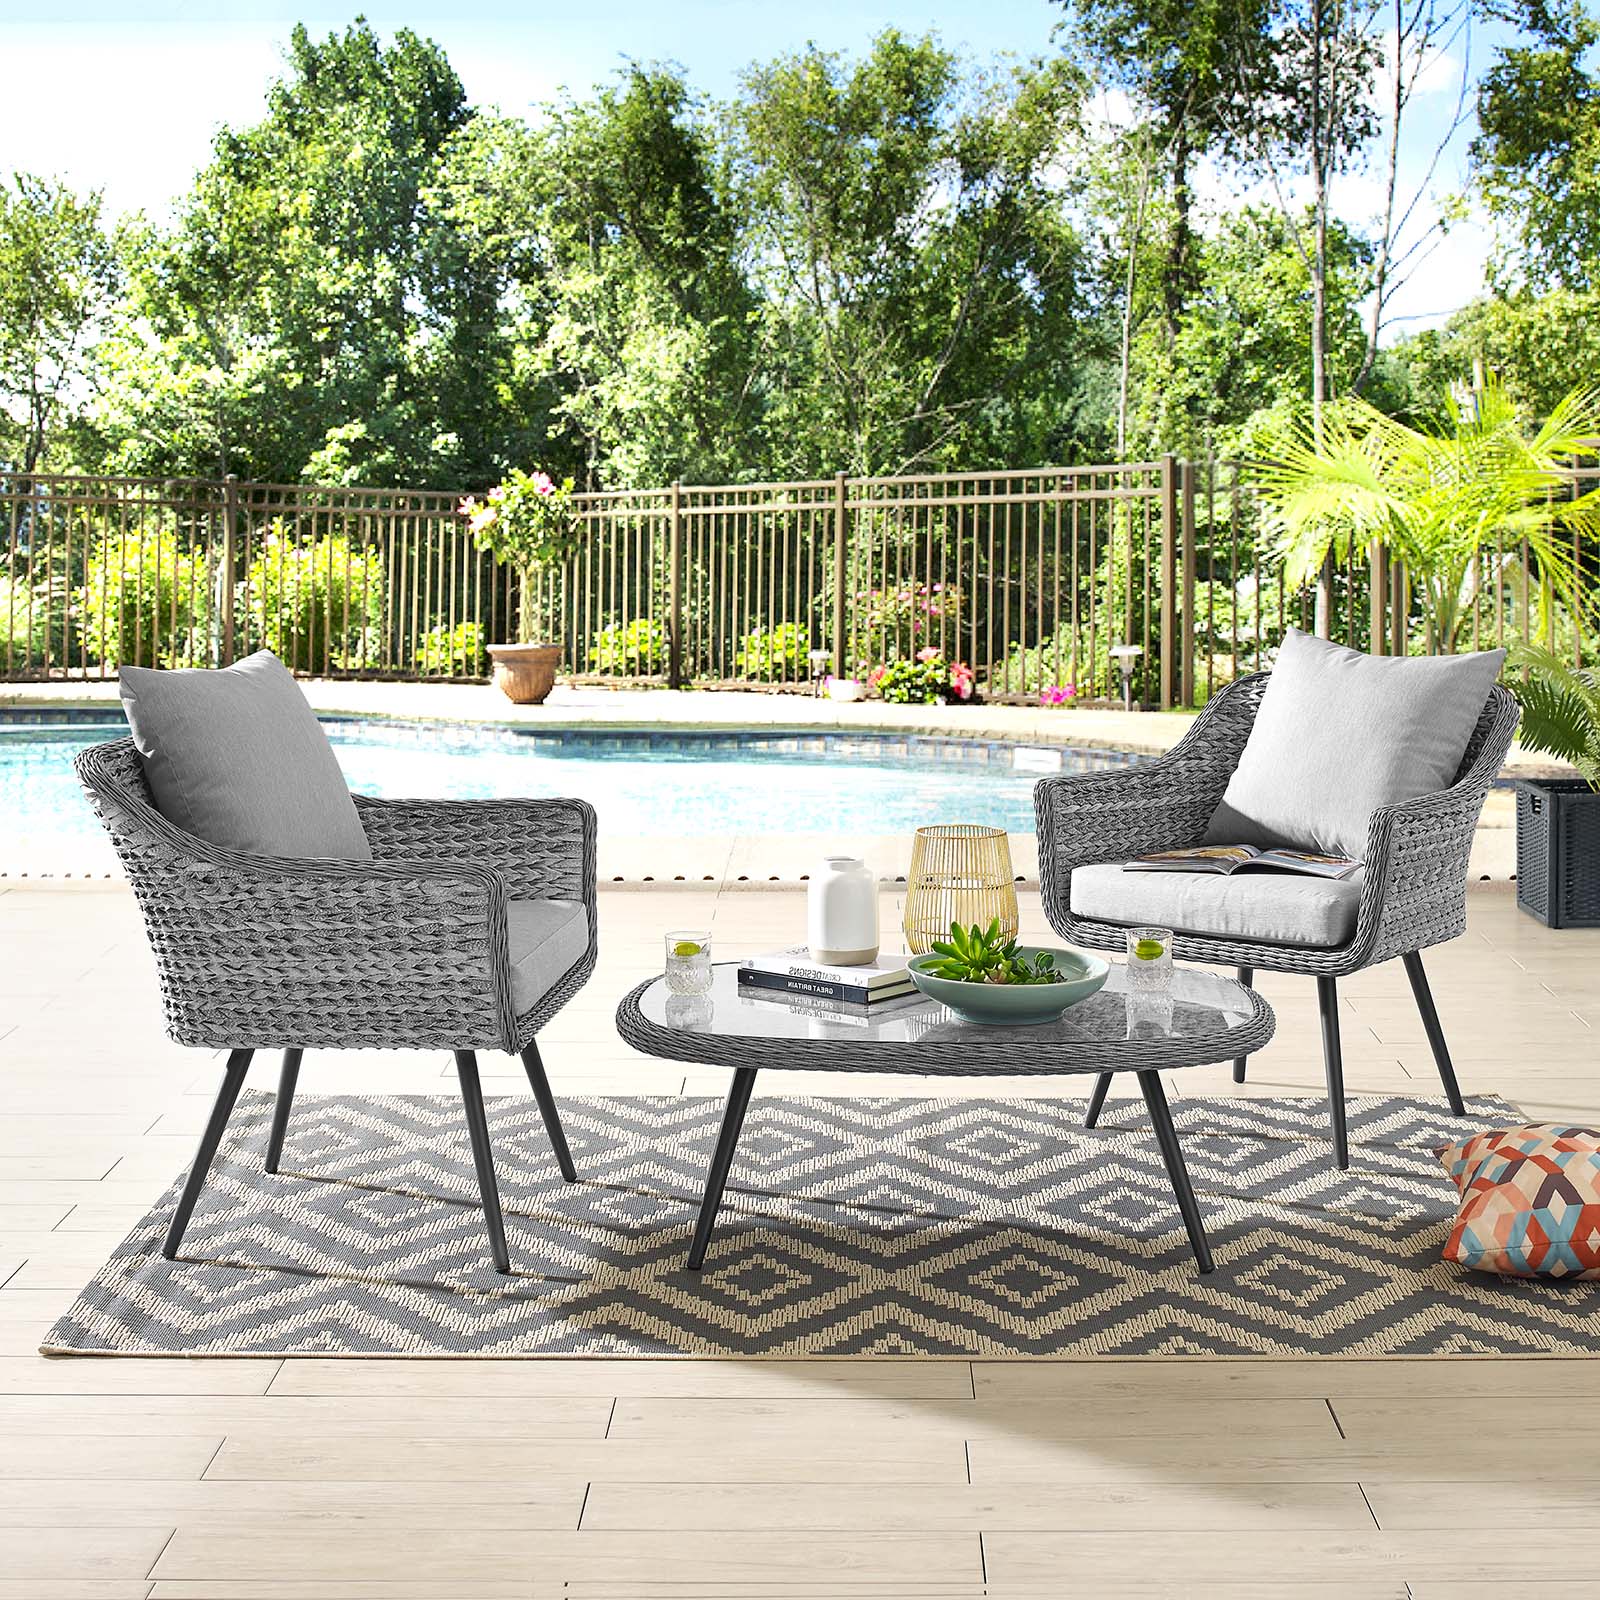 Contemporary Modern Urban Designer Outdoor Patio Balcony Garden Furniture Lounge Chair and Coffee Table Set, Aluminum Fabric Wicker Rattan, Grey Gray - image 4 of 8